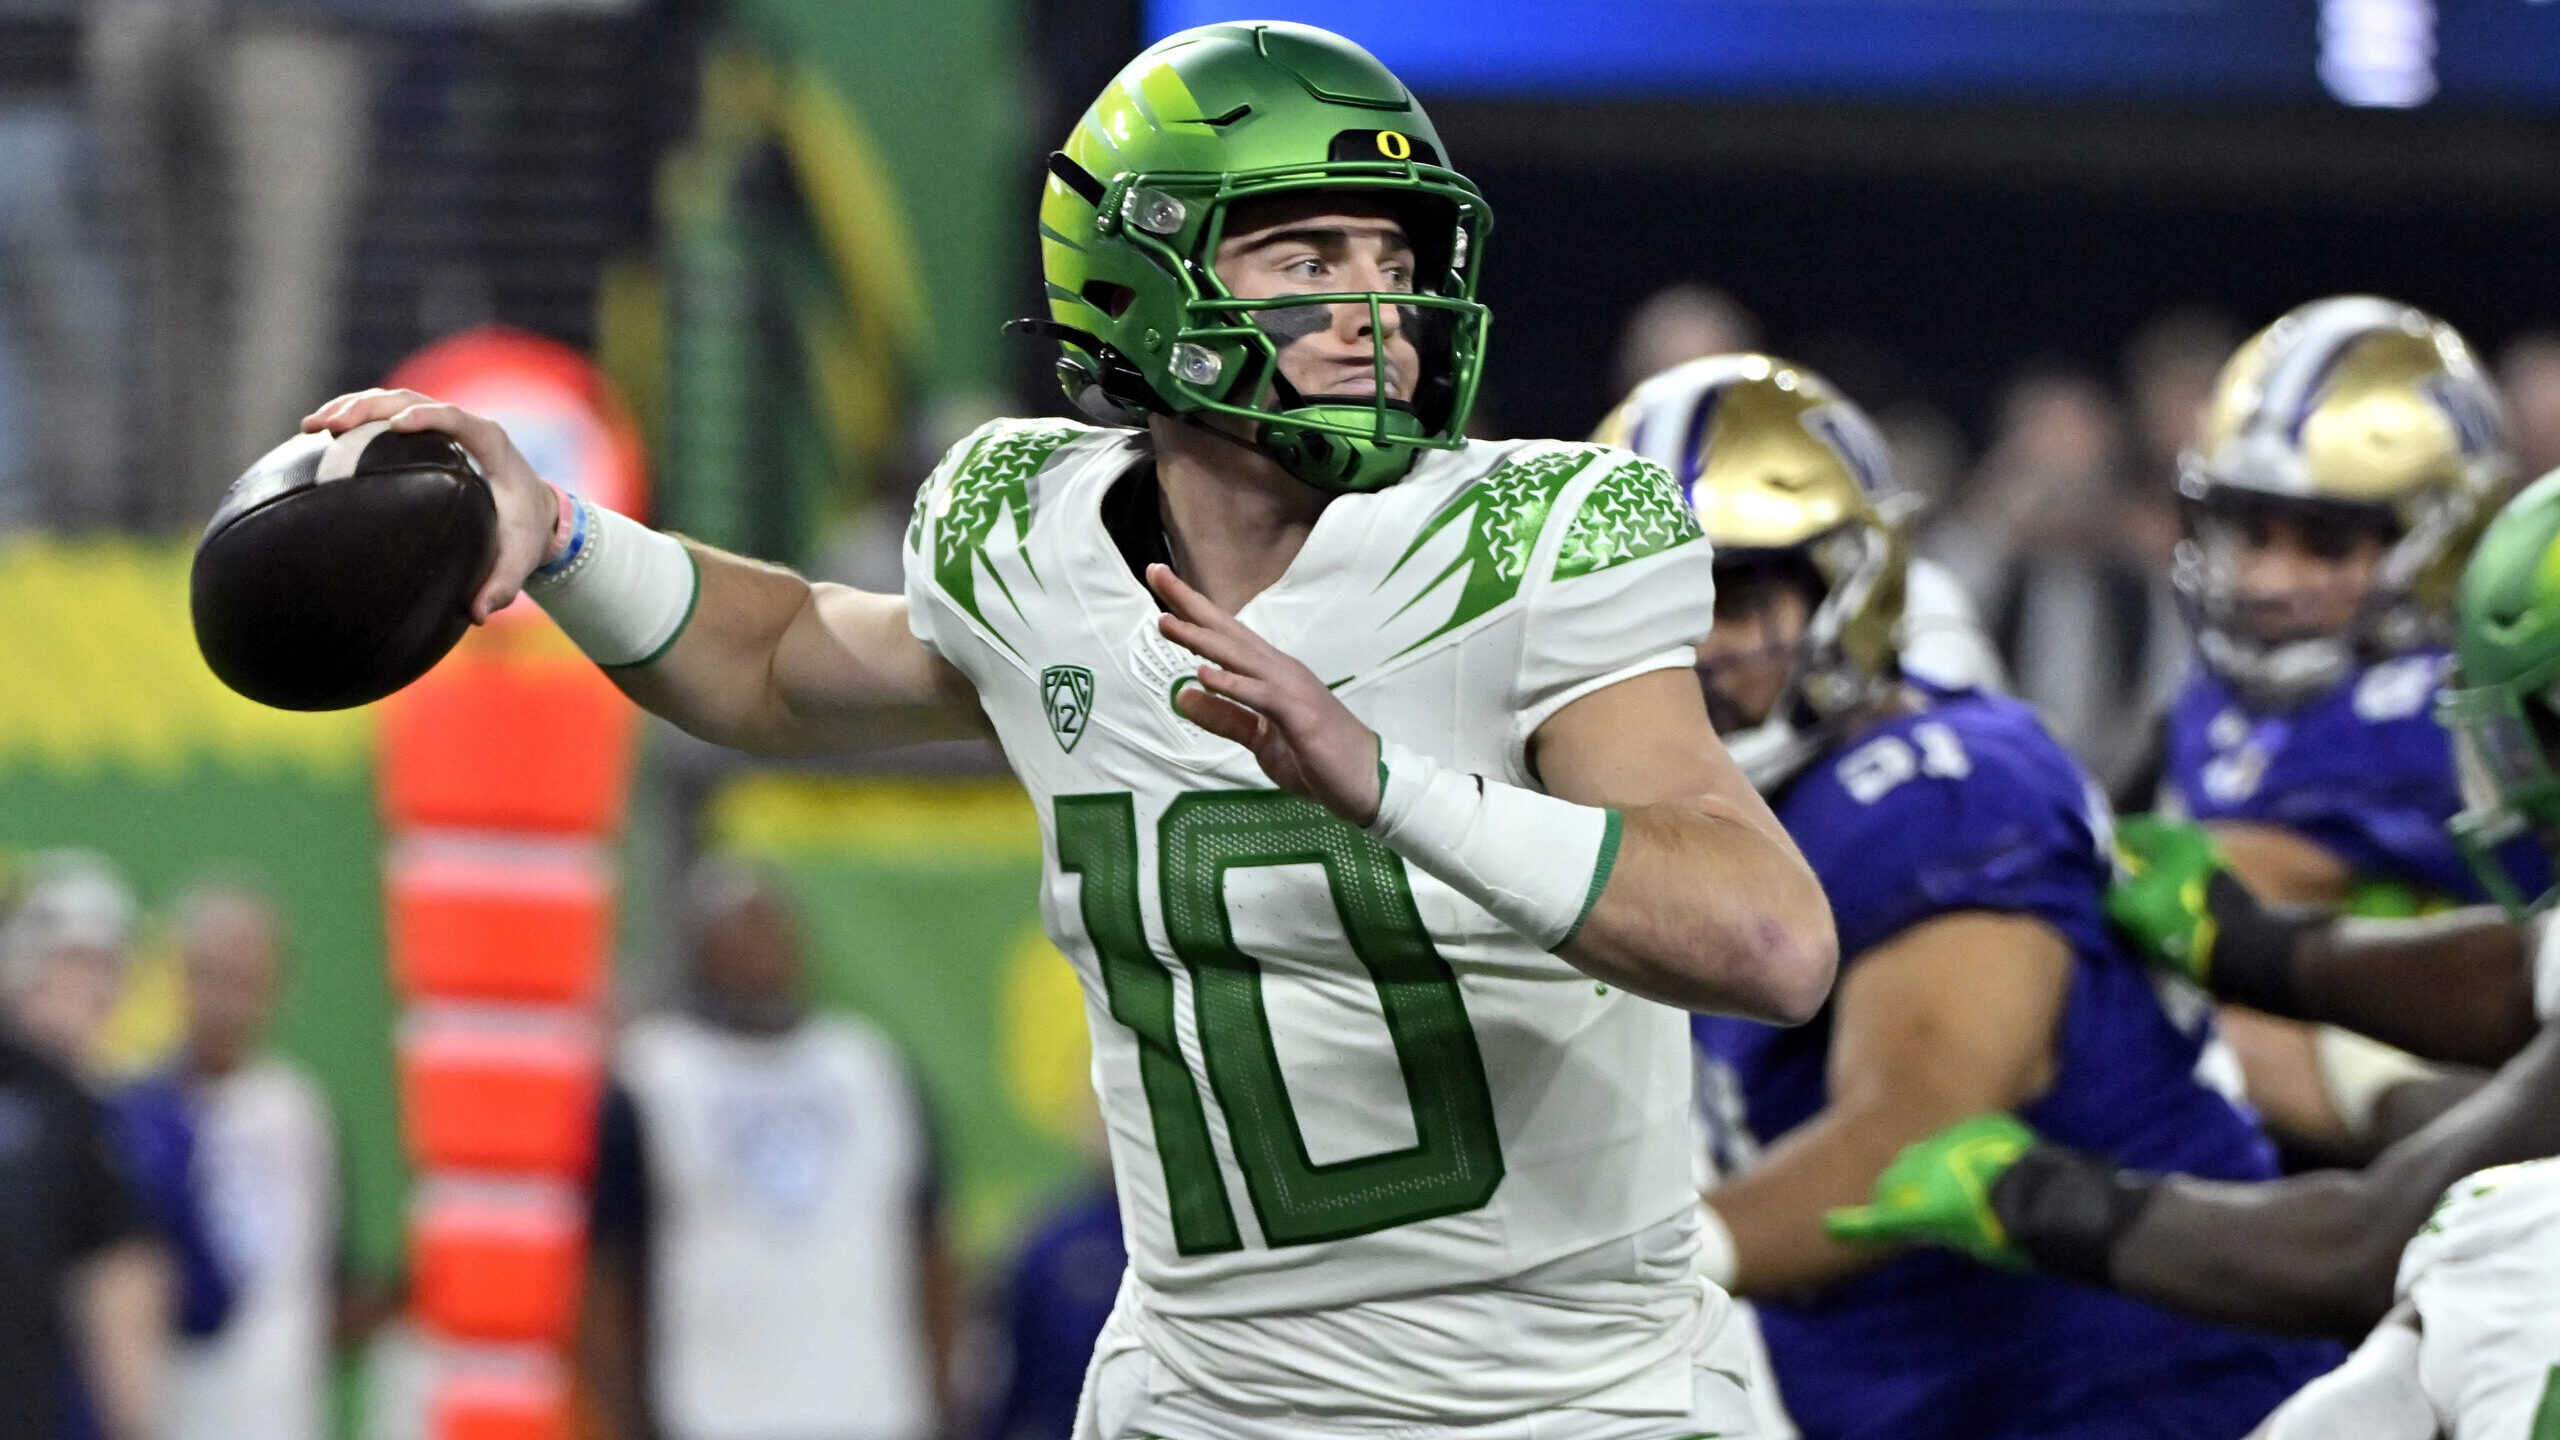 Oregon quarterback Bo Nix looks to pass against Washington during the first half of the Pac-12 cham...